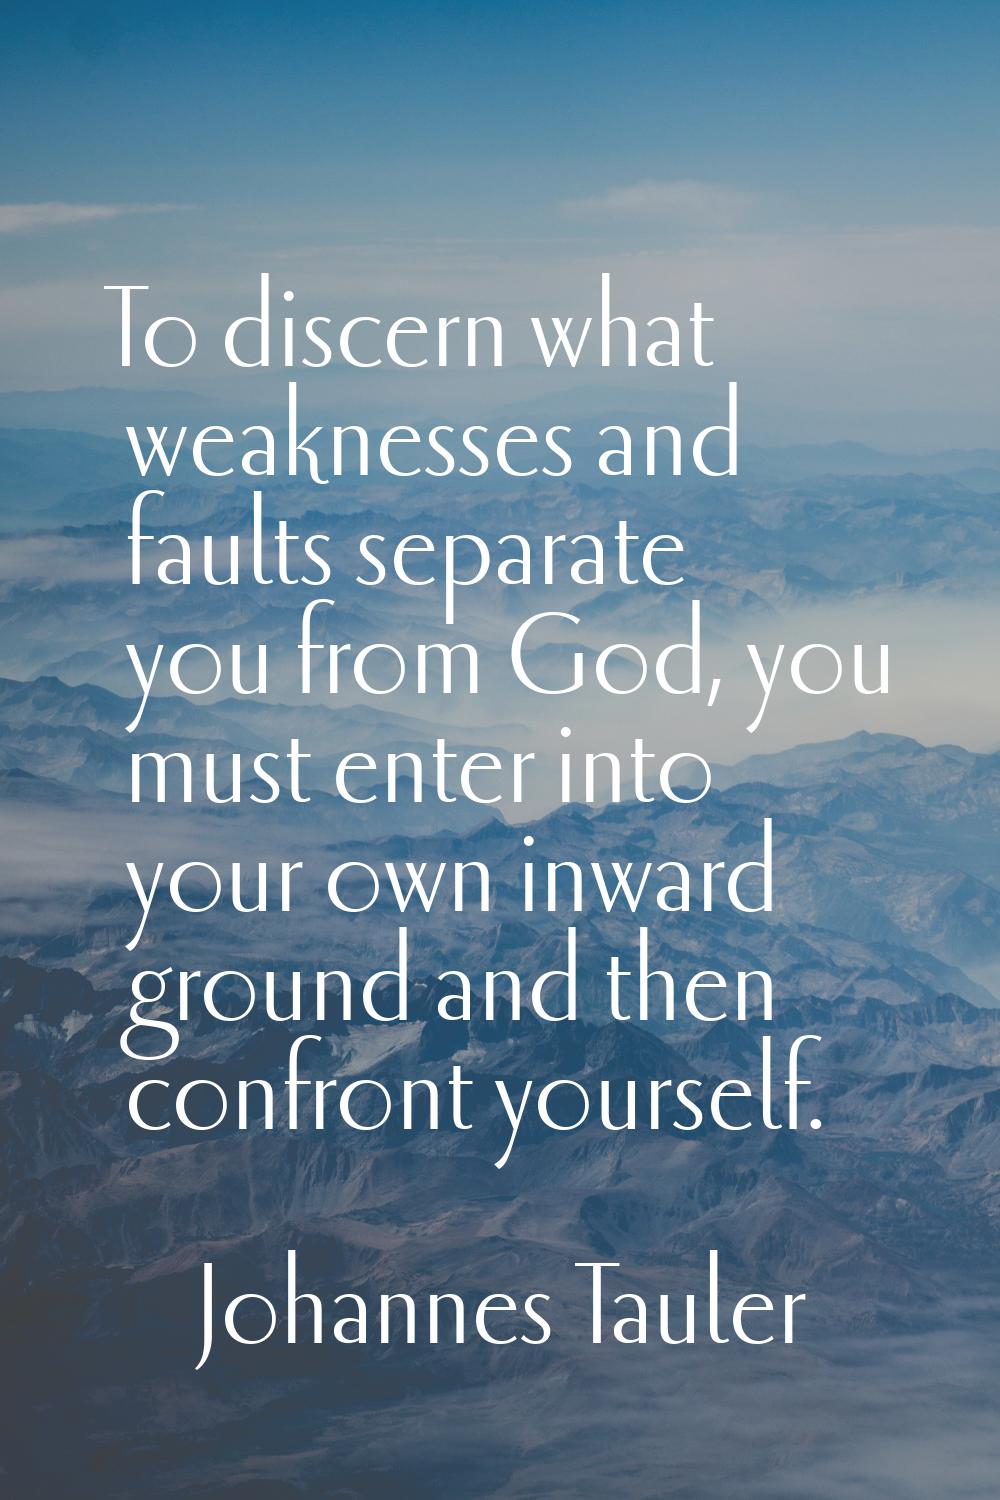 To discern what weaknesses and faults separate you from God, you must enter into your own inward gr